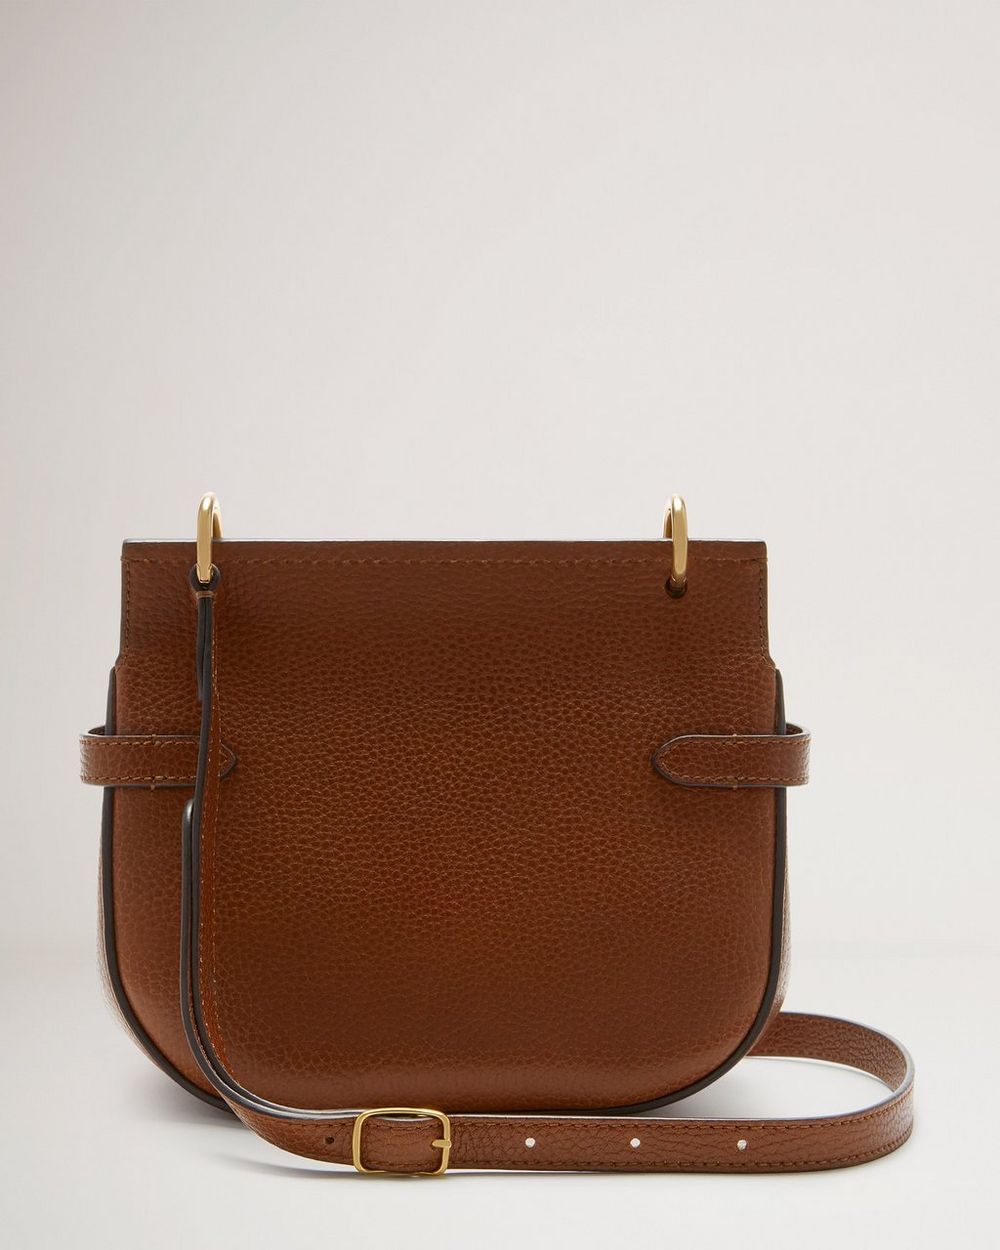 Mulberry Fold Over Leather Satchel Bag